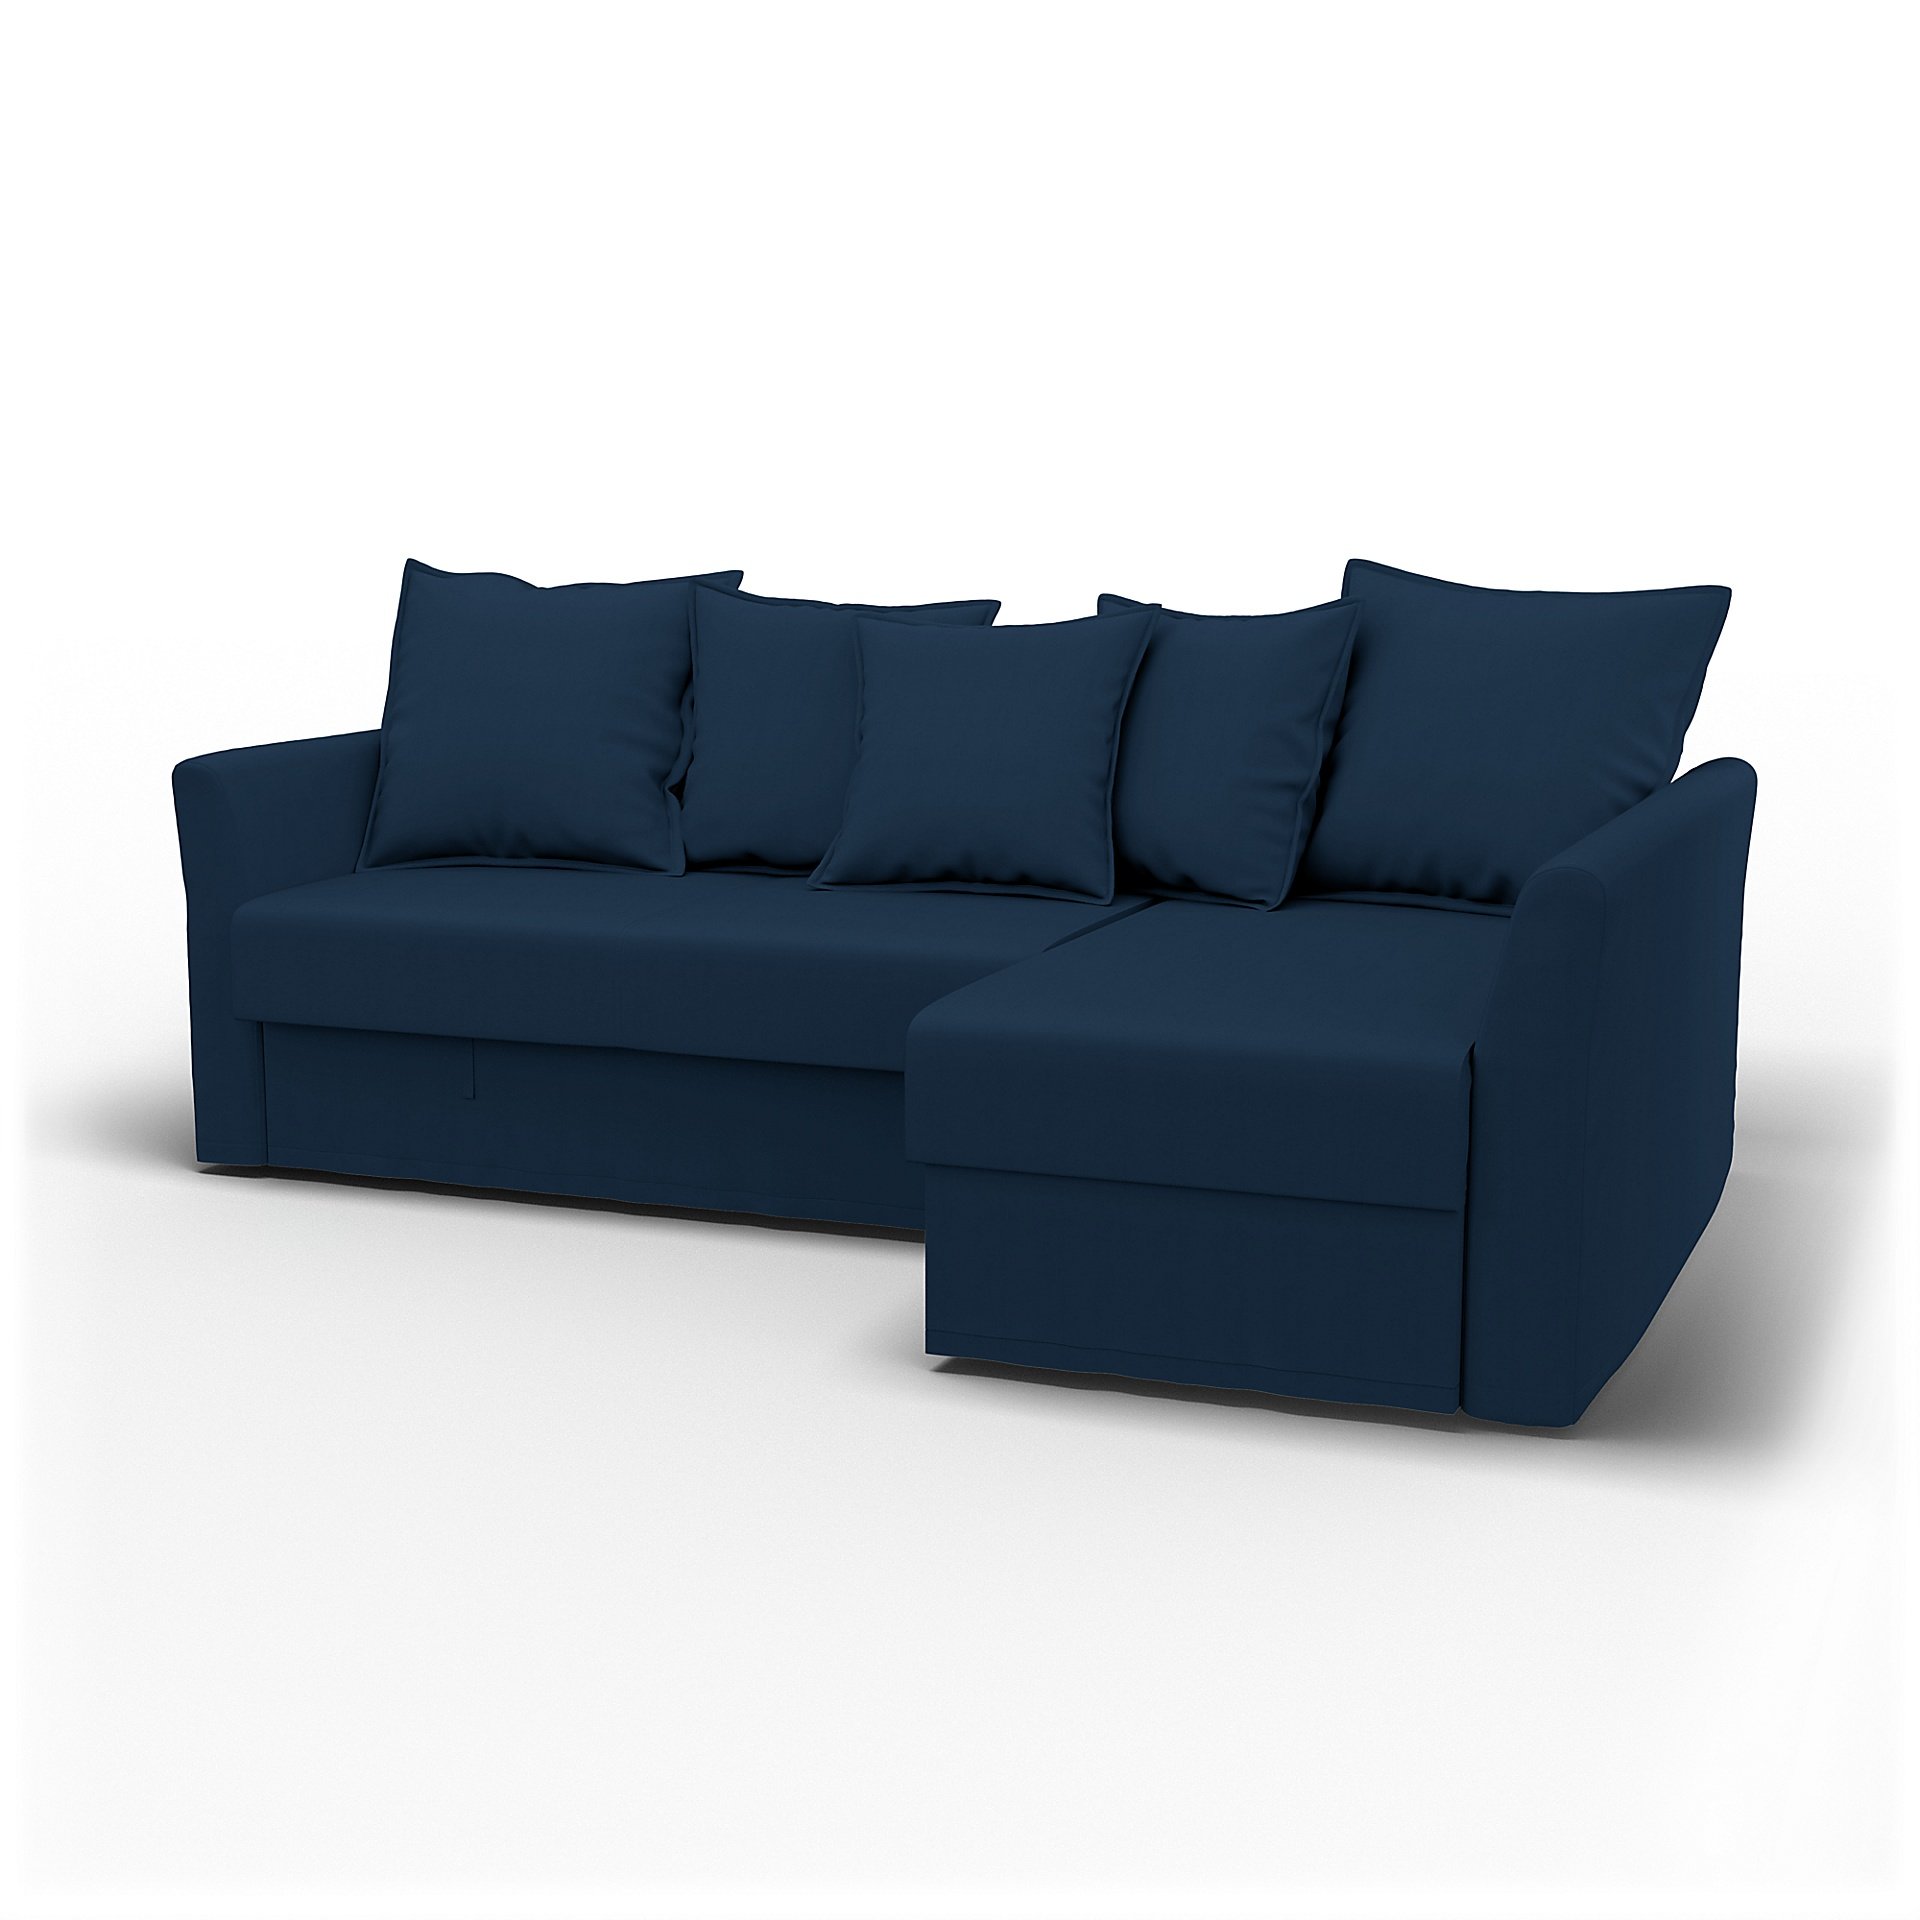 IKEA - Holmsund Sofabed with Chaiselongue, Deep Navy Blue, Cotton - Bemz